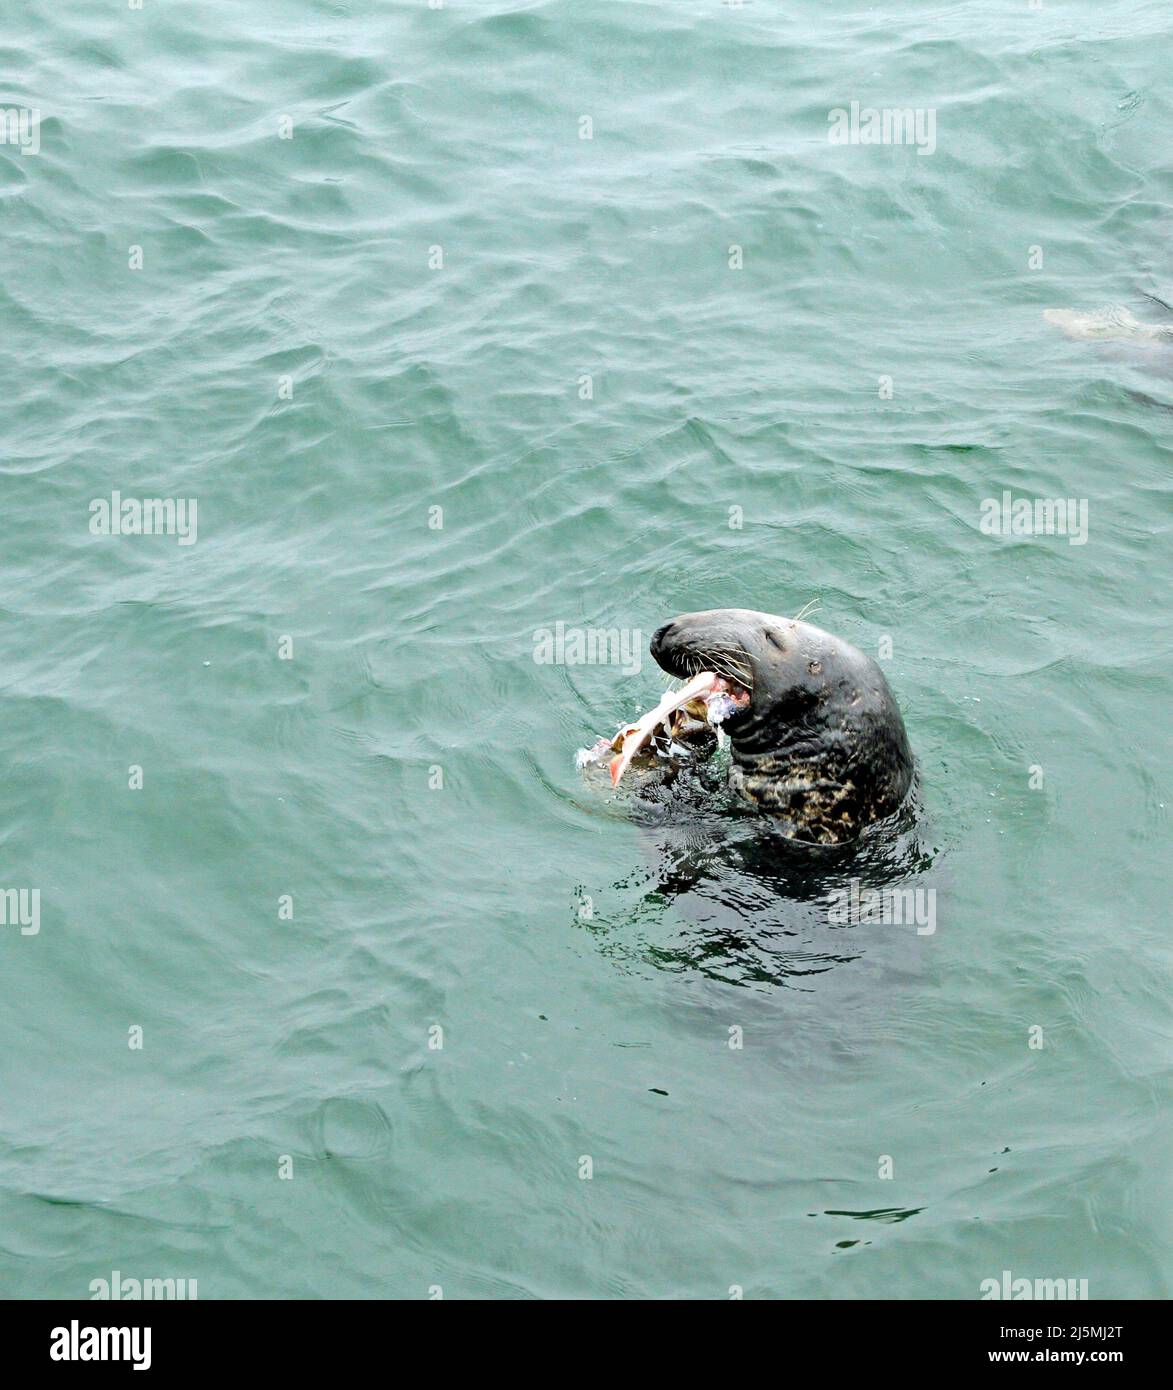 A male gray seal (Halichoerus grypus atlanttica) eating a dogfish in the waters of Chatham Harbor at the Chatham Fish Pier, Cape Cod, Massachusetts Stock Photo